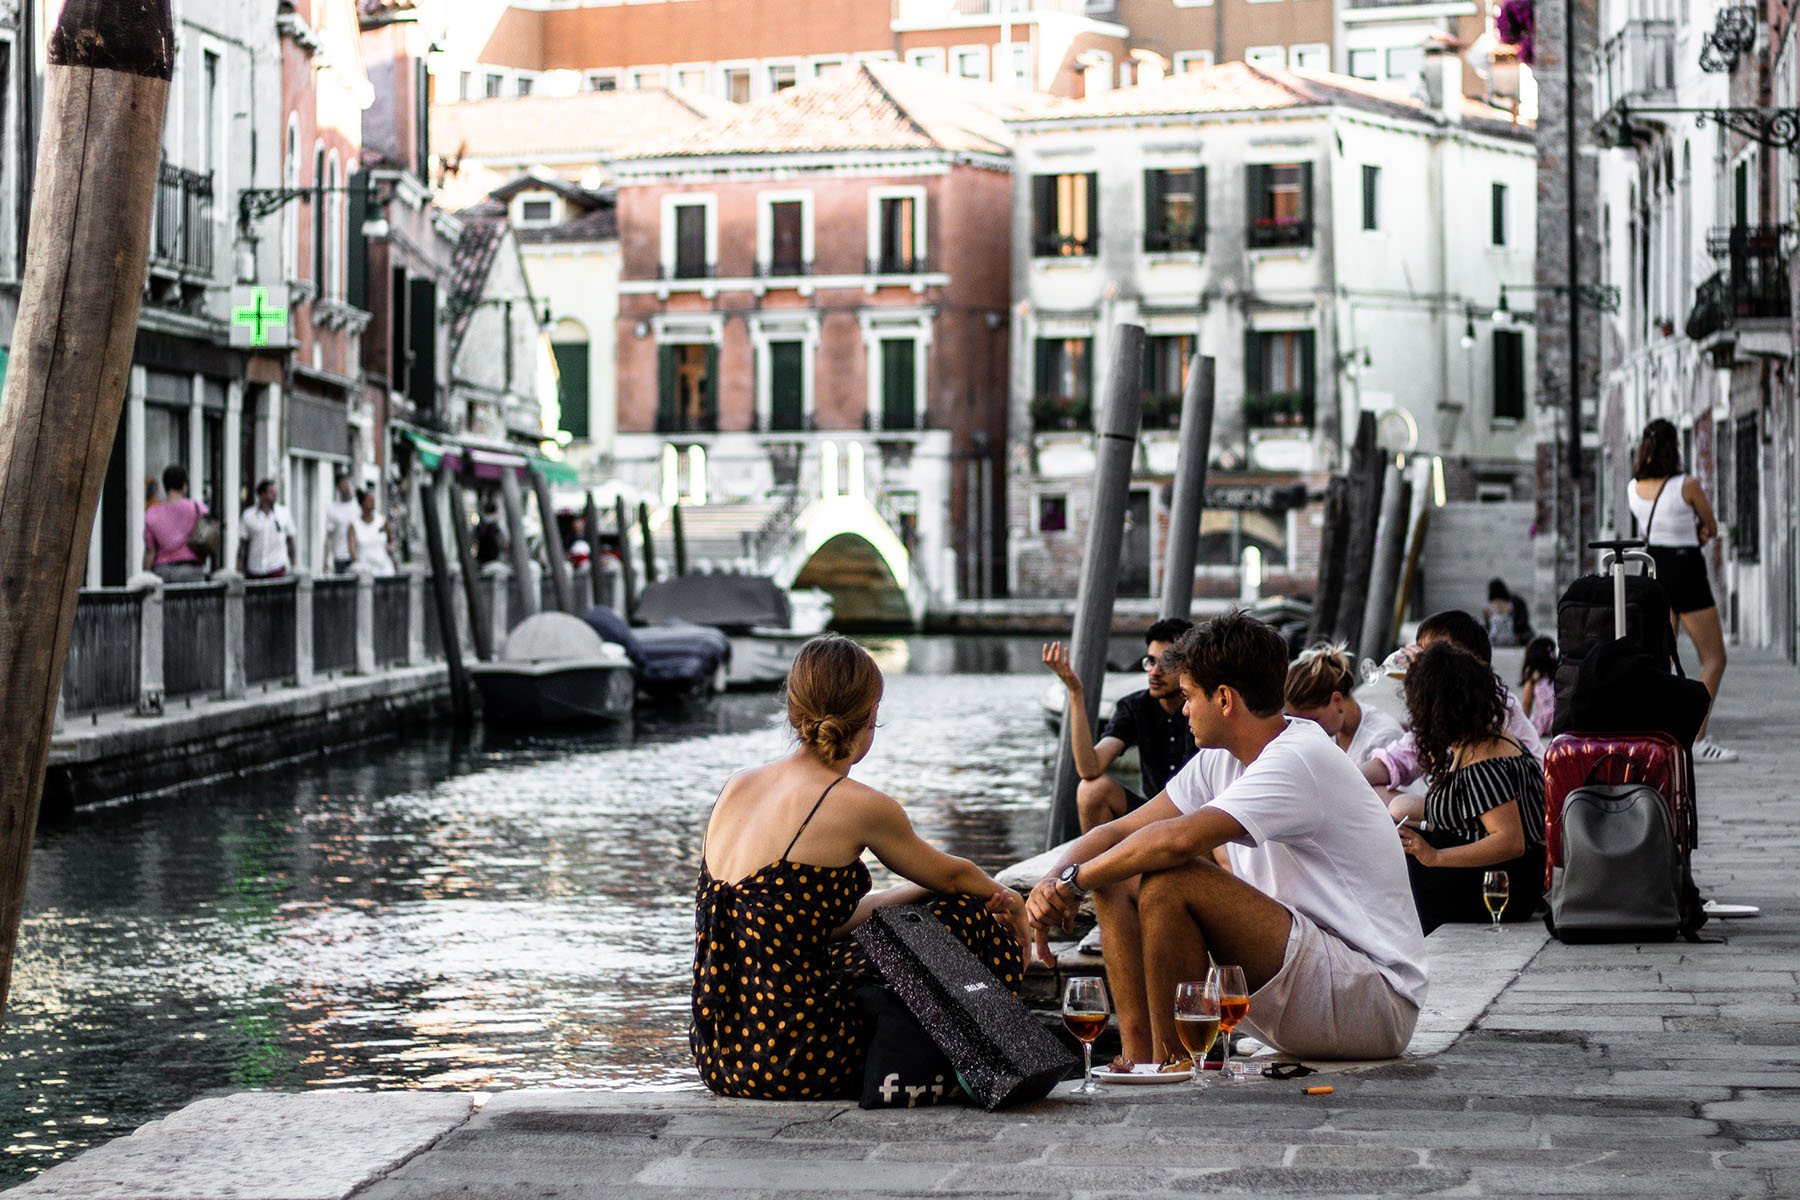 People having drinks on the side of the canal in Venice, Italy.